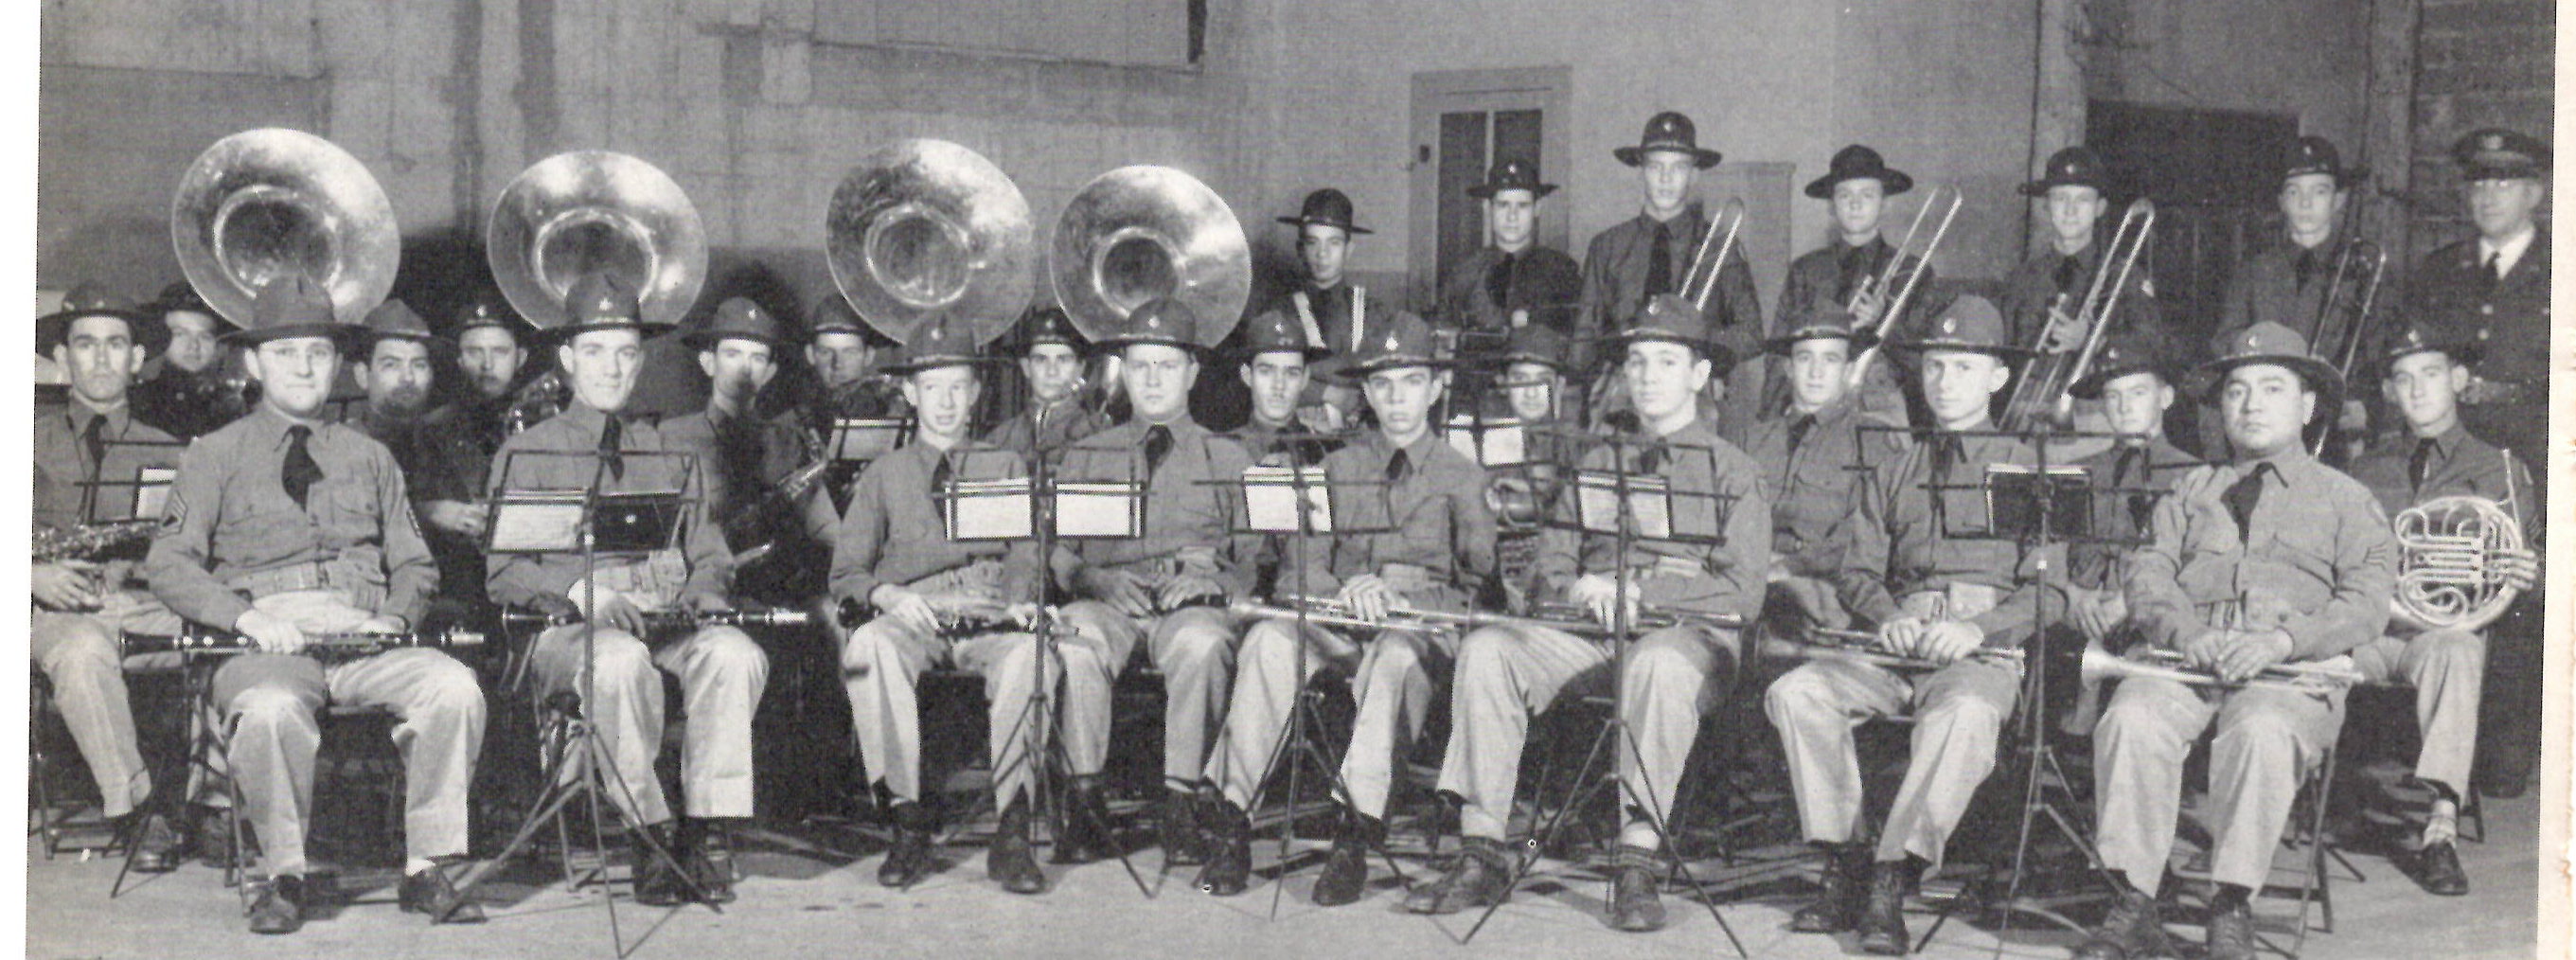 141st Infantry Band 36th Infantry Division- 1940